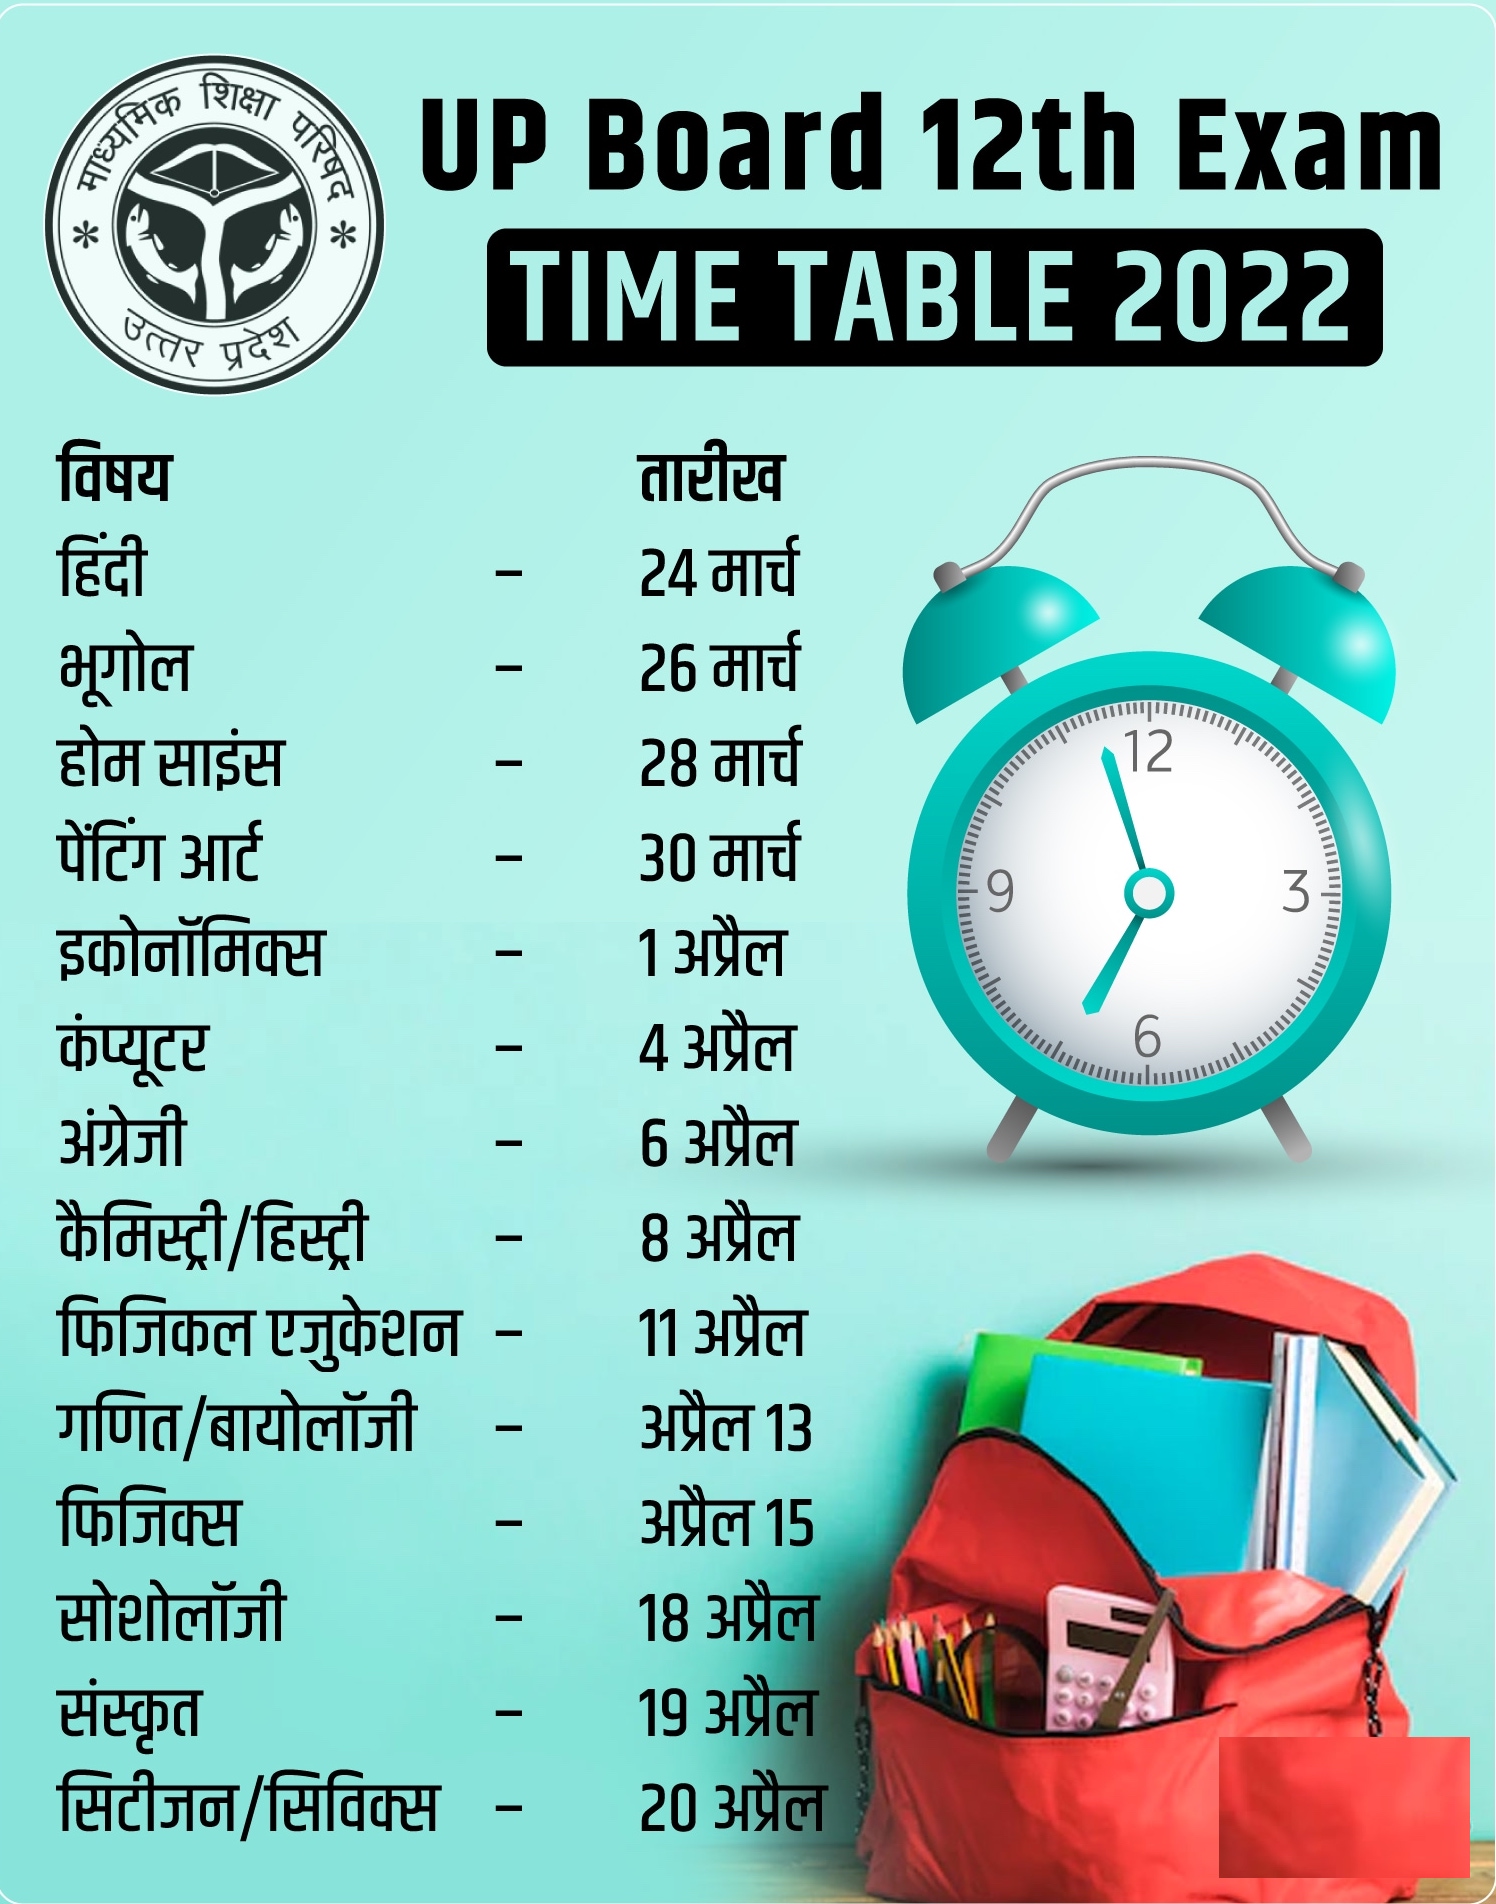 UP Board 12th Time Table 2022 PDF